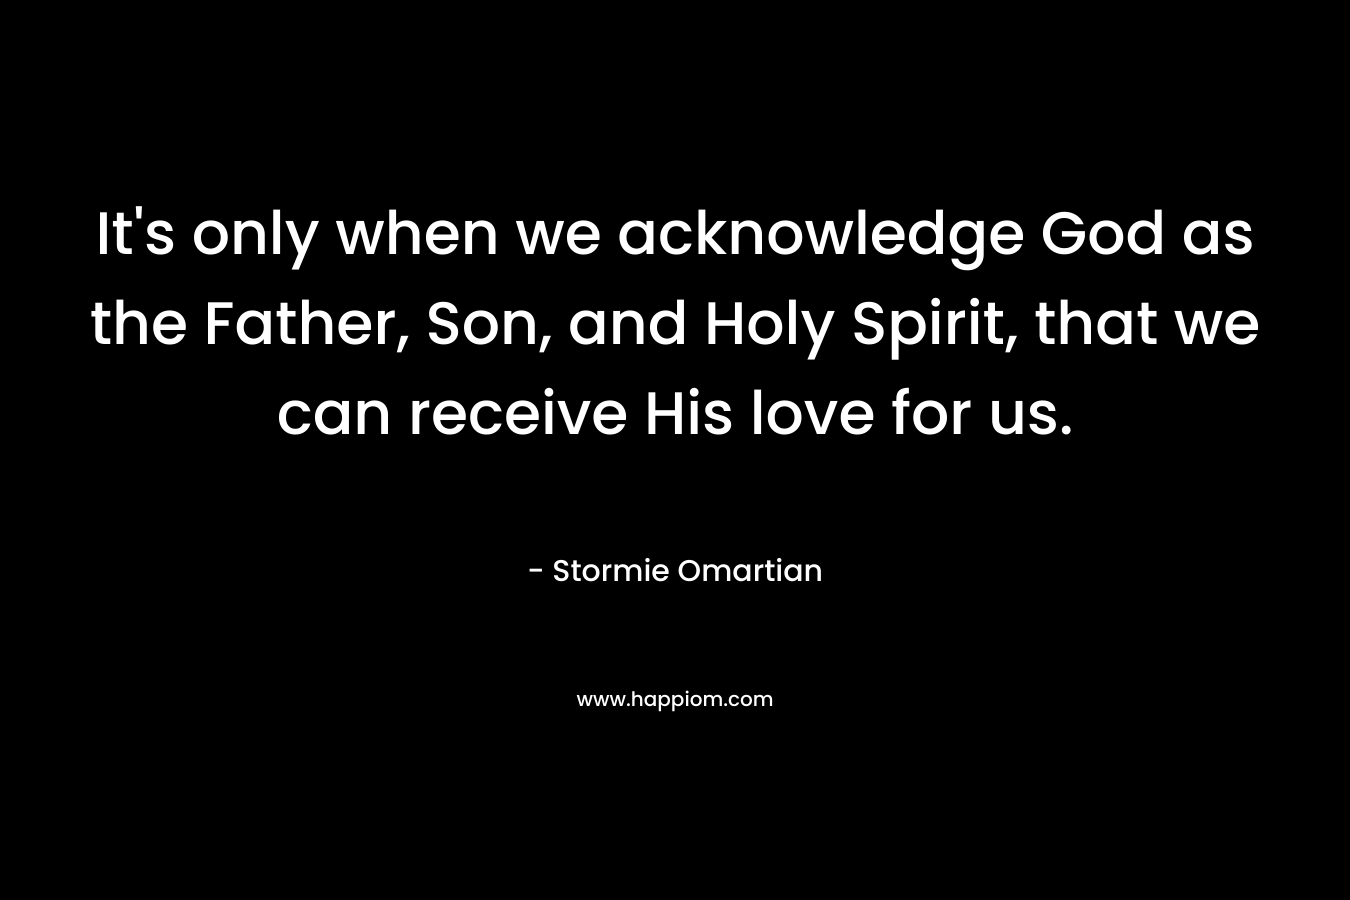 It’s only when we acknowledge God as the Father, Son, and Holy Spirit, that we can receive His love for us. – Stormie Omartian